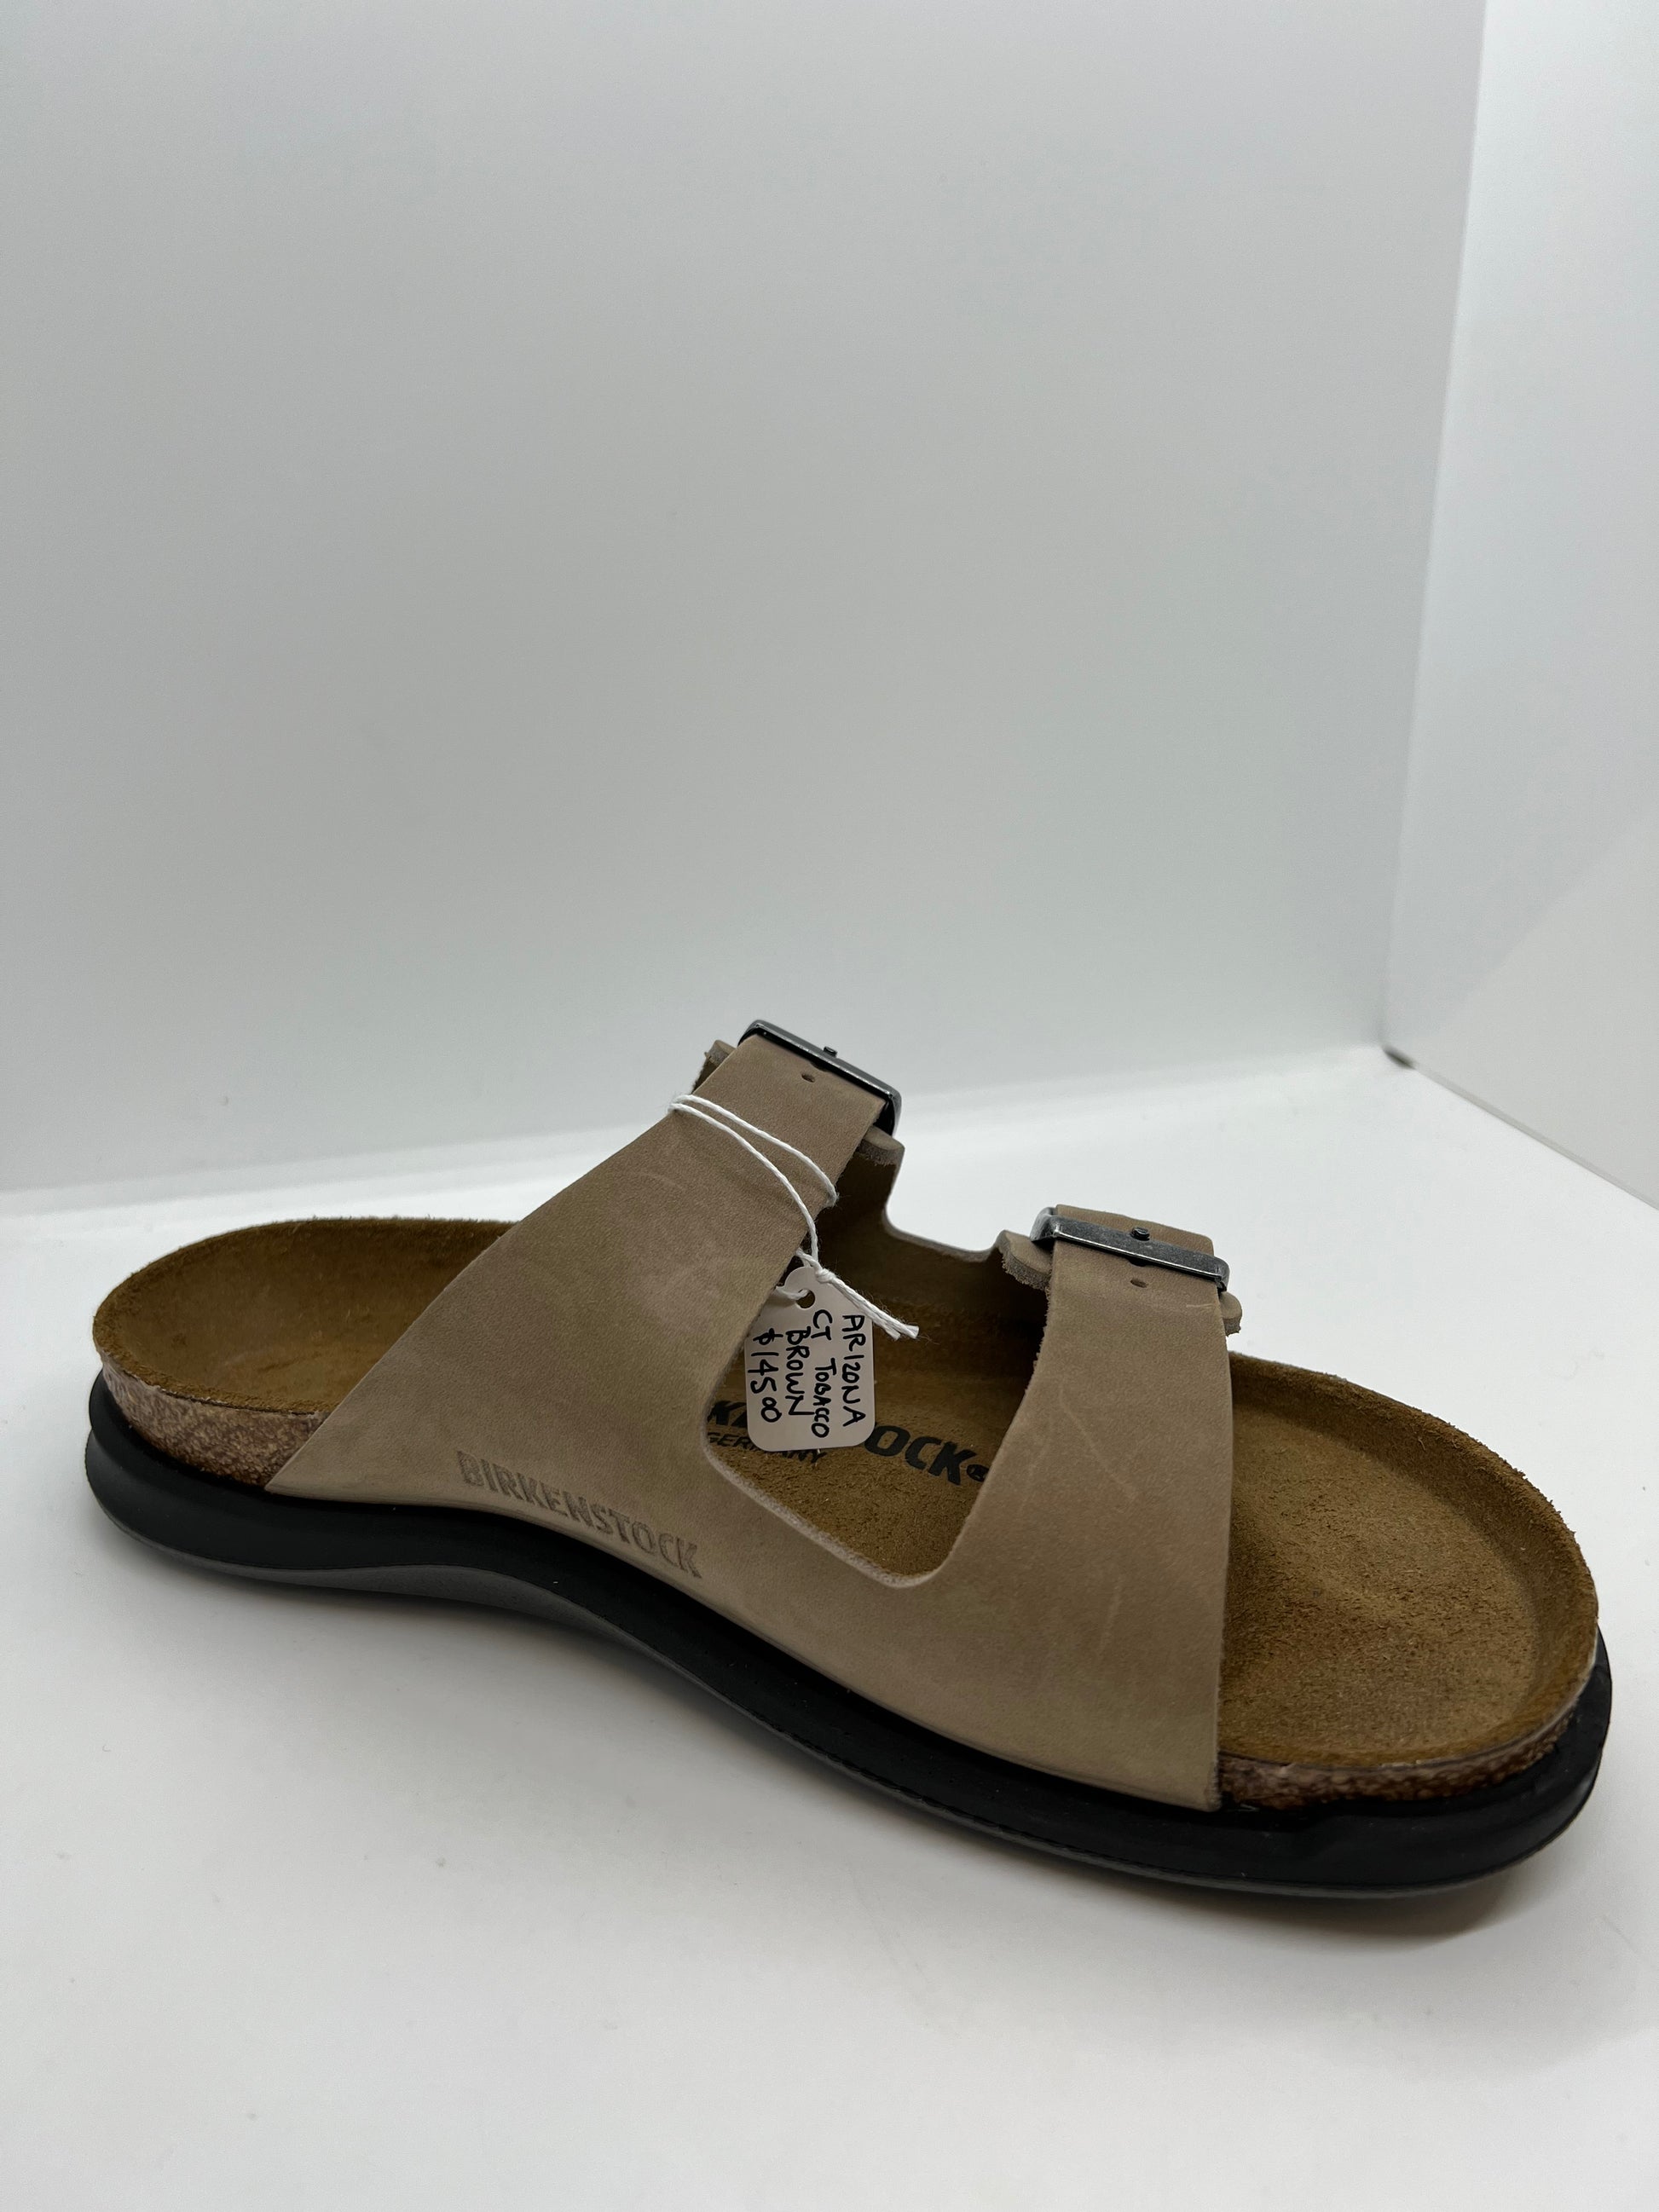 Birkenstock CT Men’s Faded Tobacco Brown Oiled Leather - All Mixed Up 